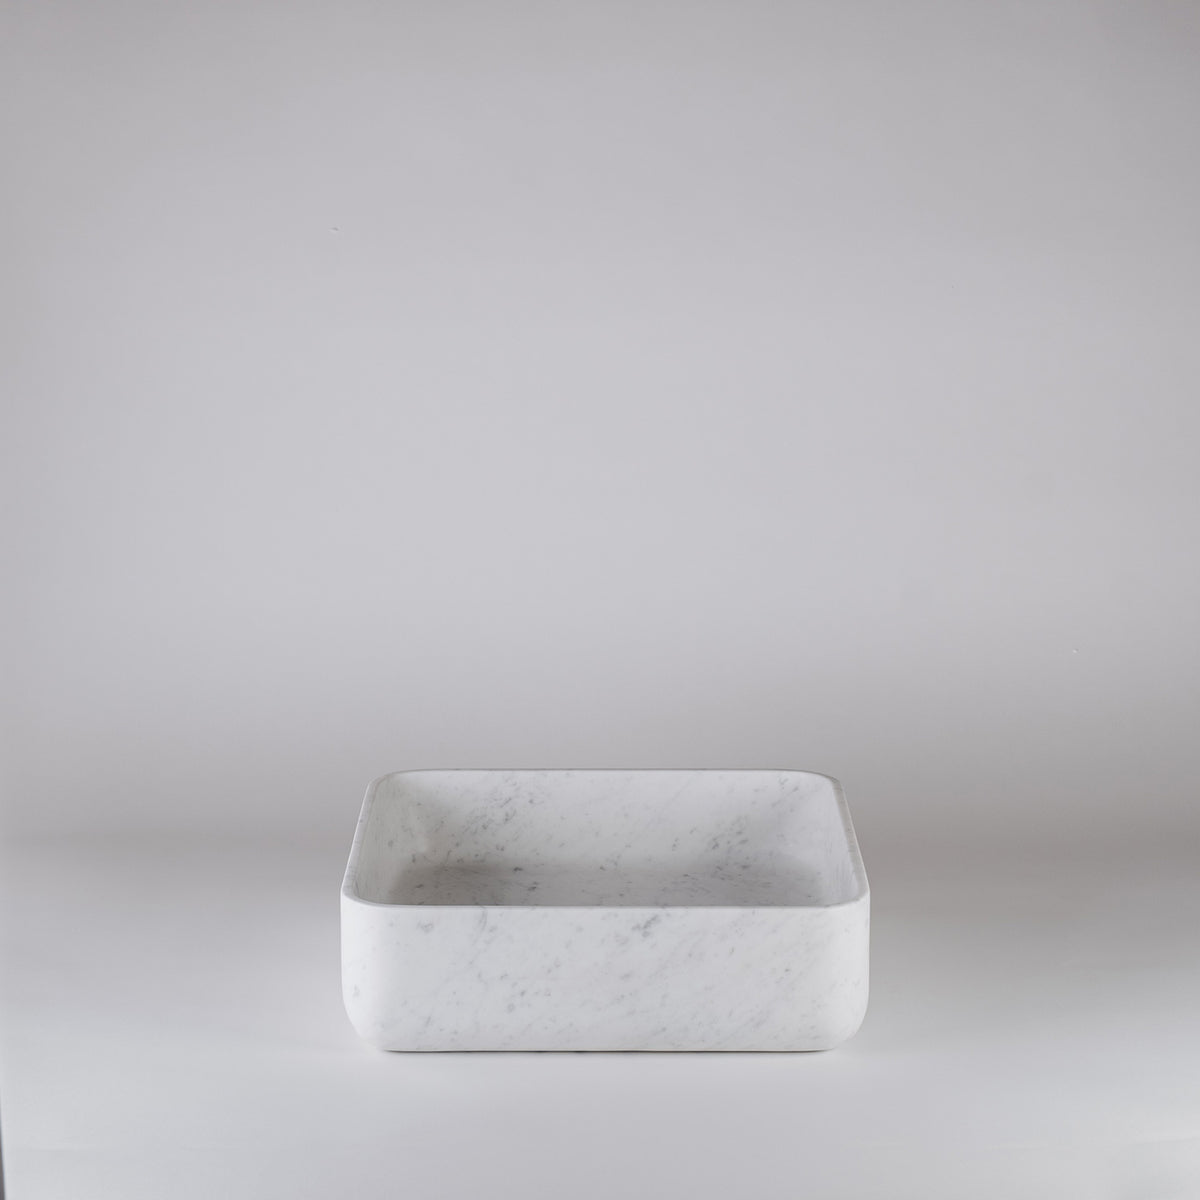 Thin Walled Square Vessel Sink in Carrara Marble image 3 of 3